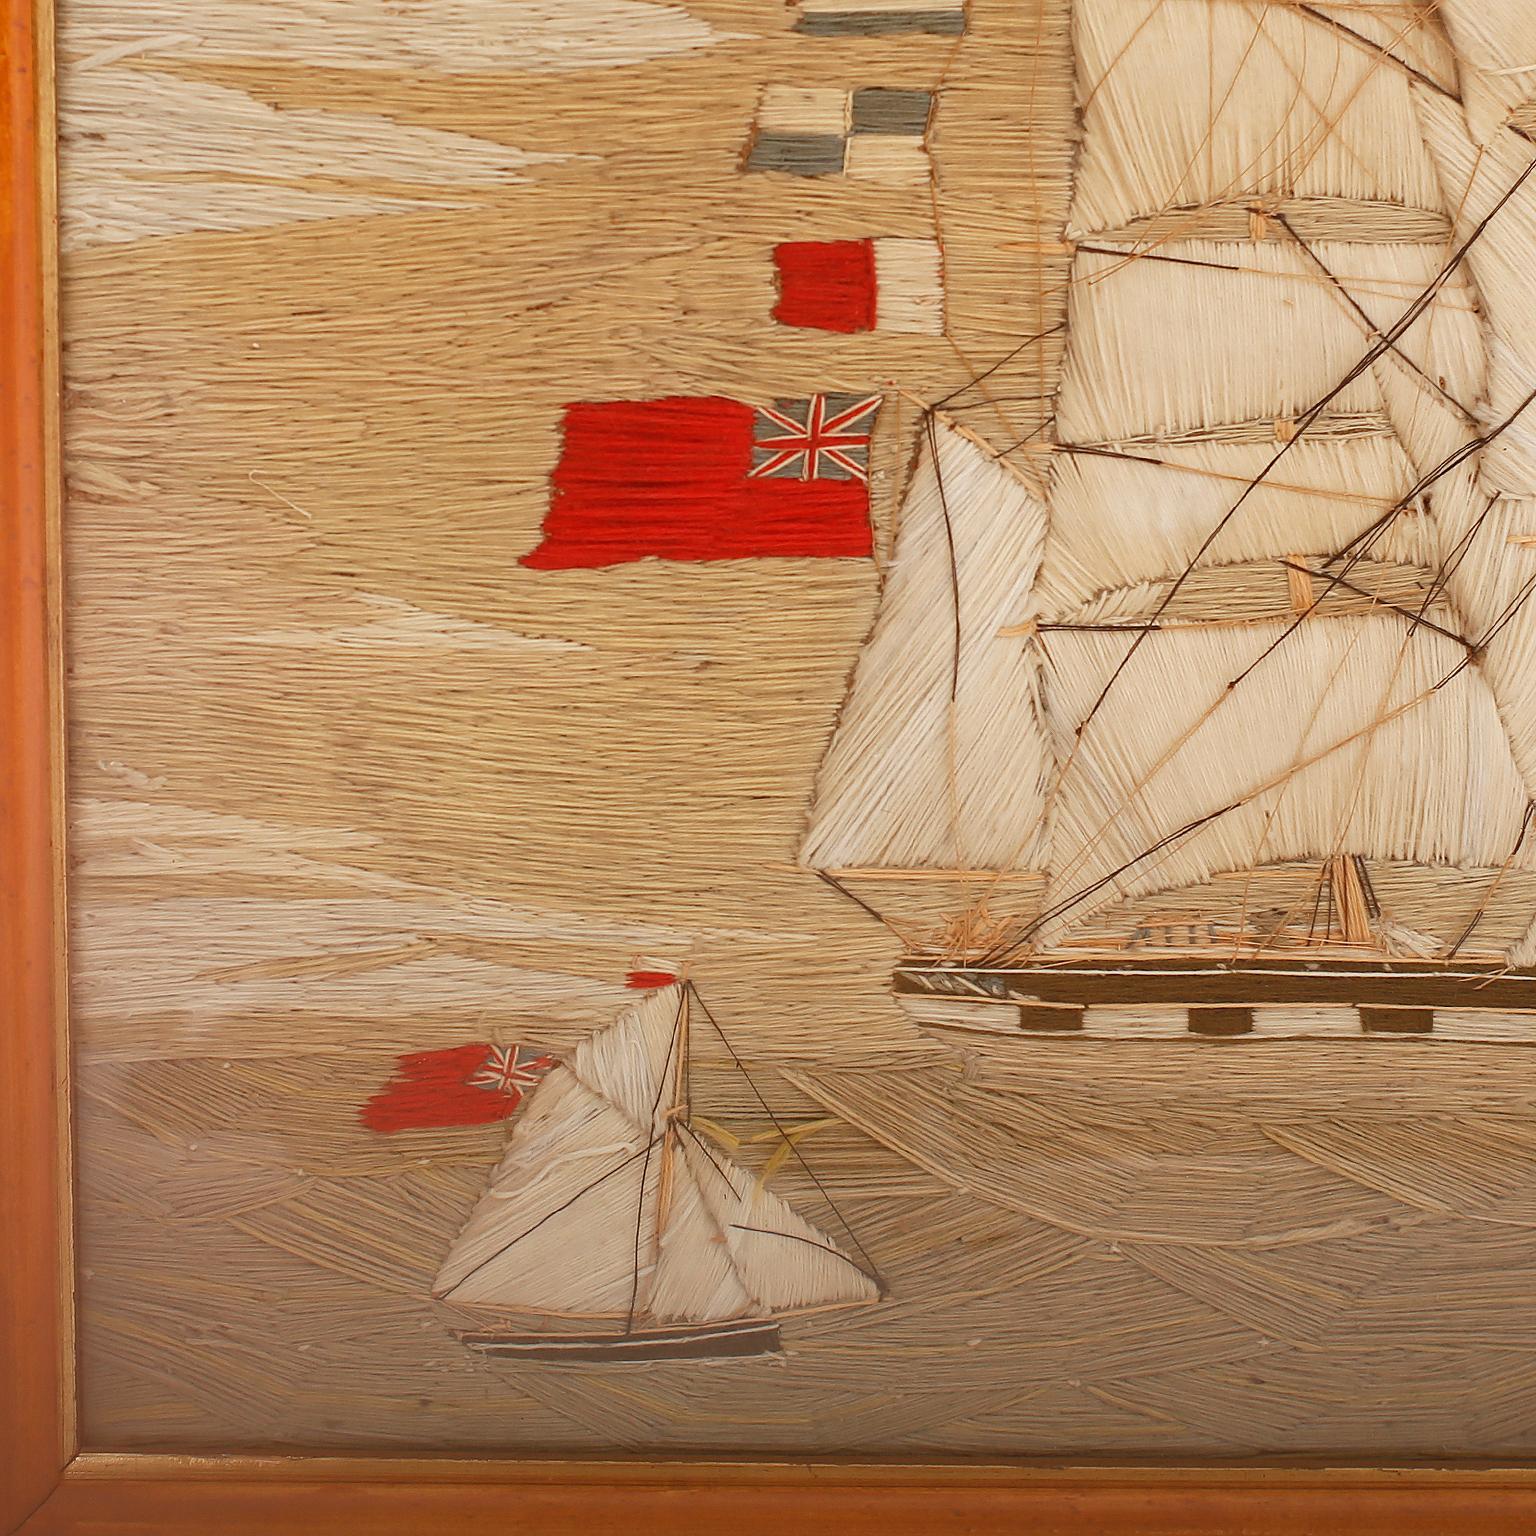 English Wool Work 'Woolie' Needlepoint Embroidery of the British Ship Amelia For Sale